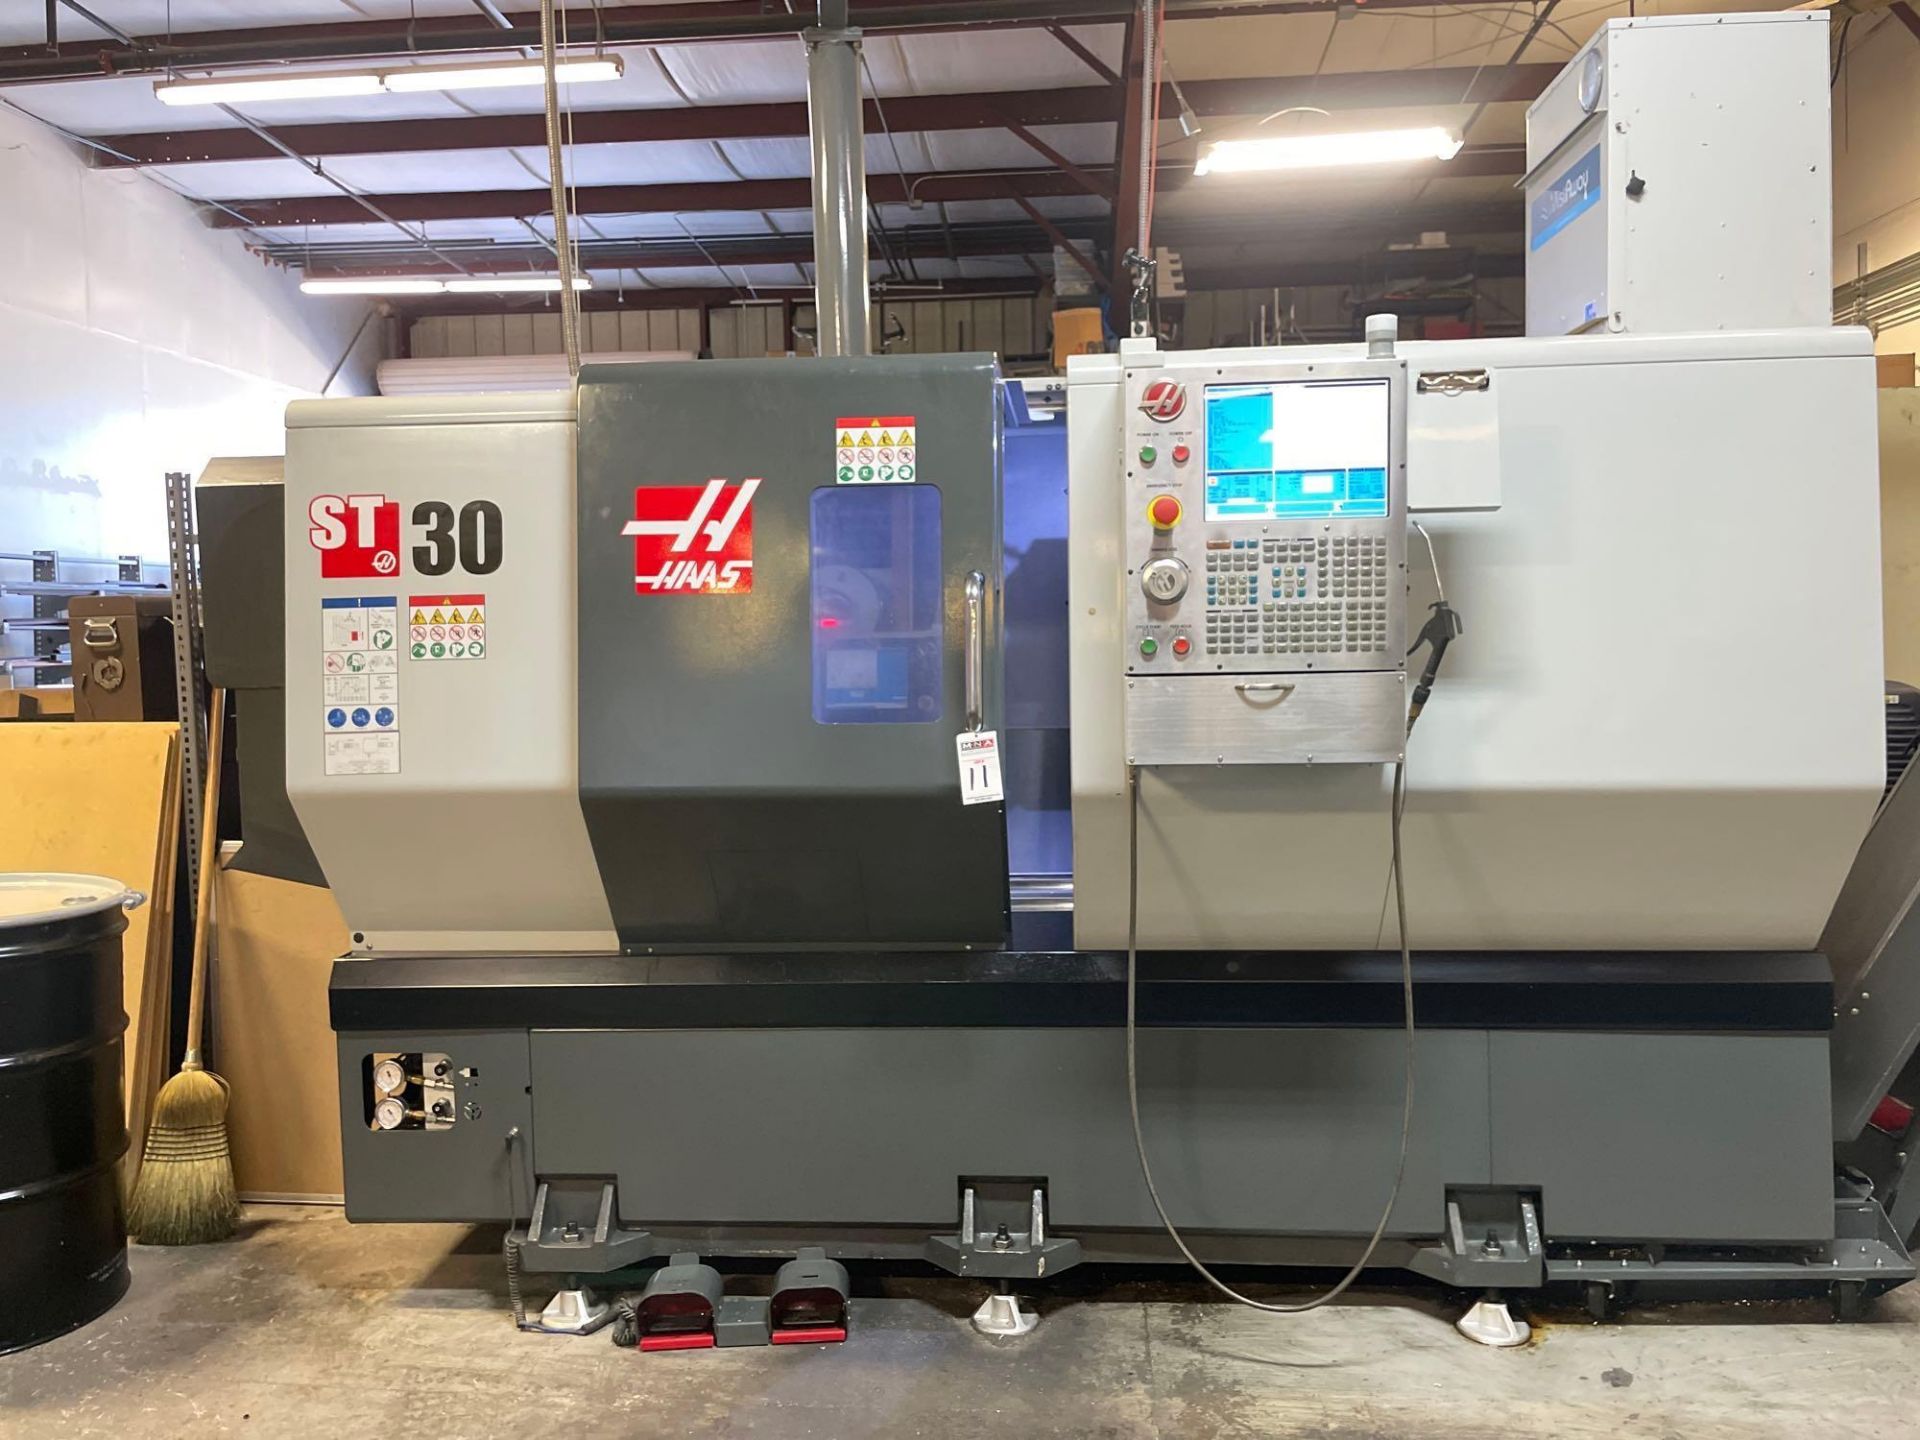 Haas ST-30 3-Axis CNC Lathe, C-Axis, 12" Hydraulic Chuck, 12 Position Turret, High Torque, New 2017 - Image 8 of 12